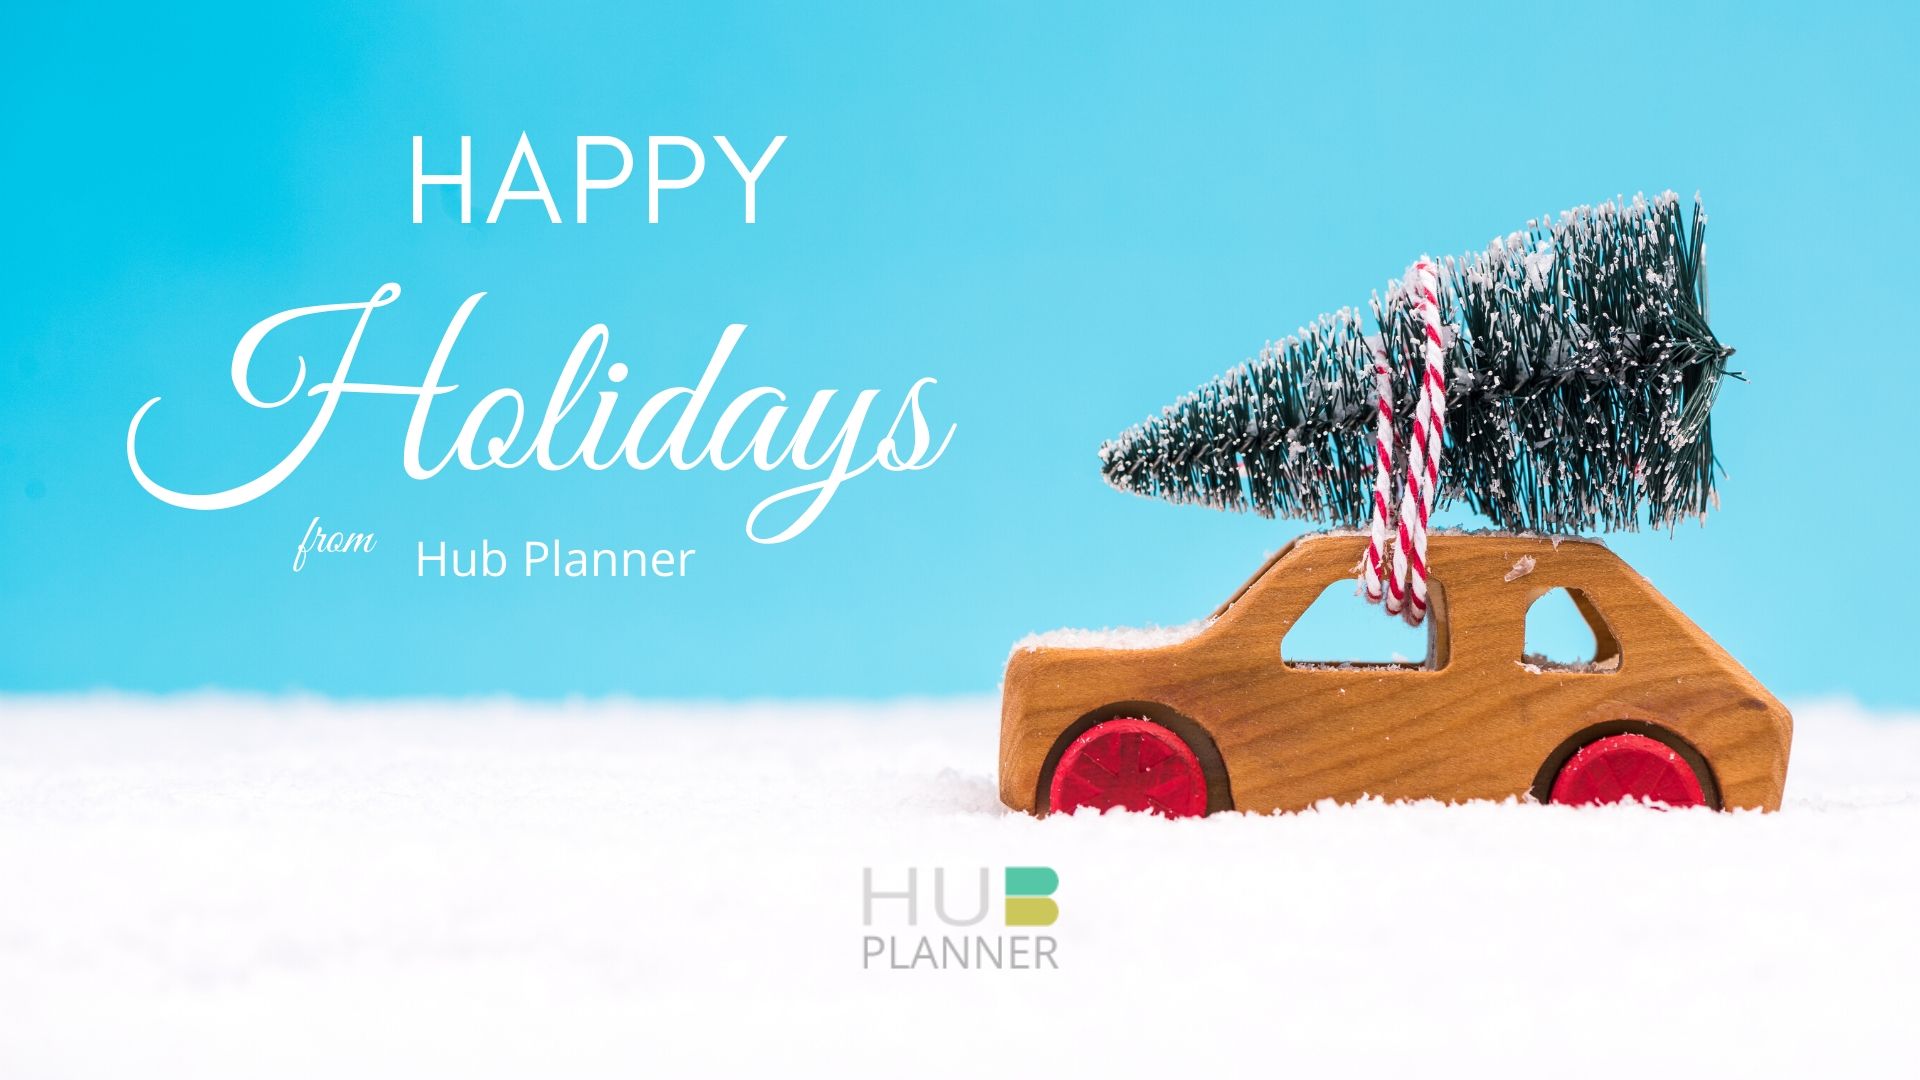 Happy Holidays from Hub Planner